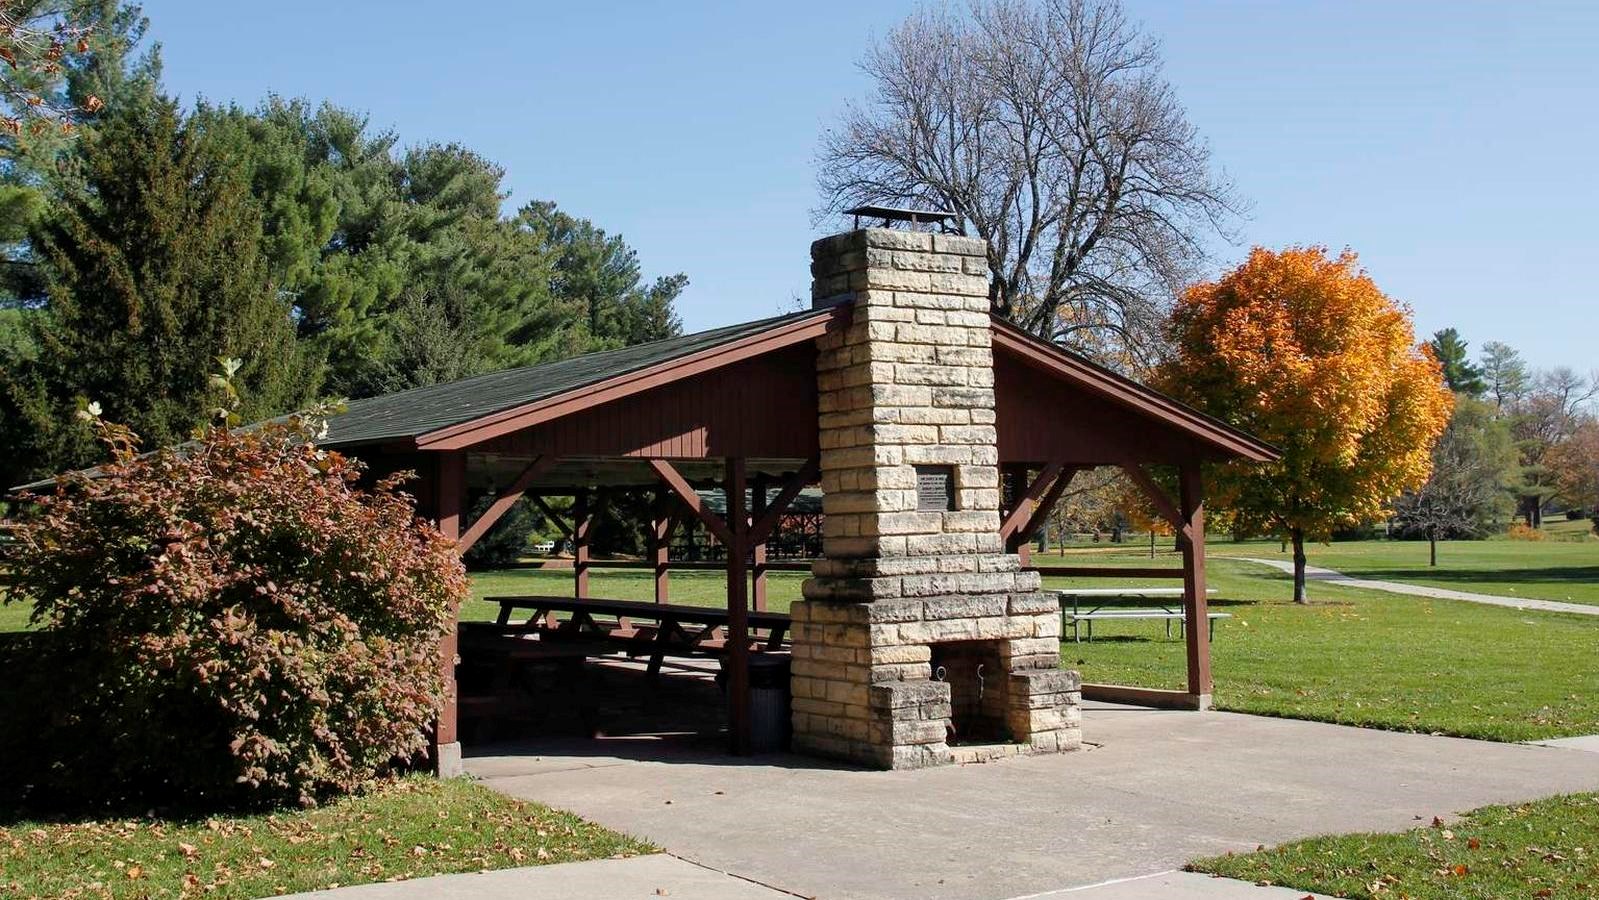 A timber picnic shelter has a limestone chimney and is painted reddish brown.